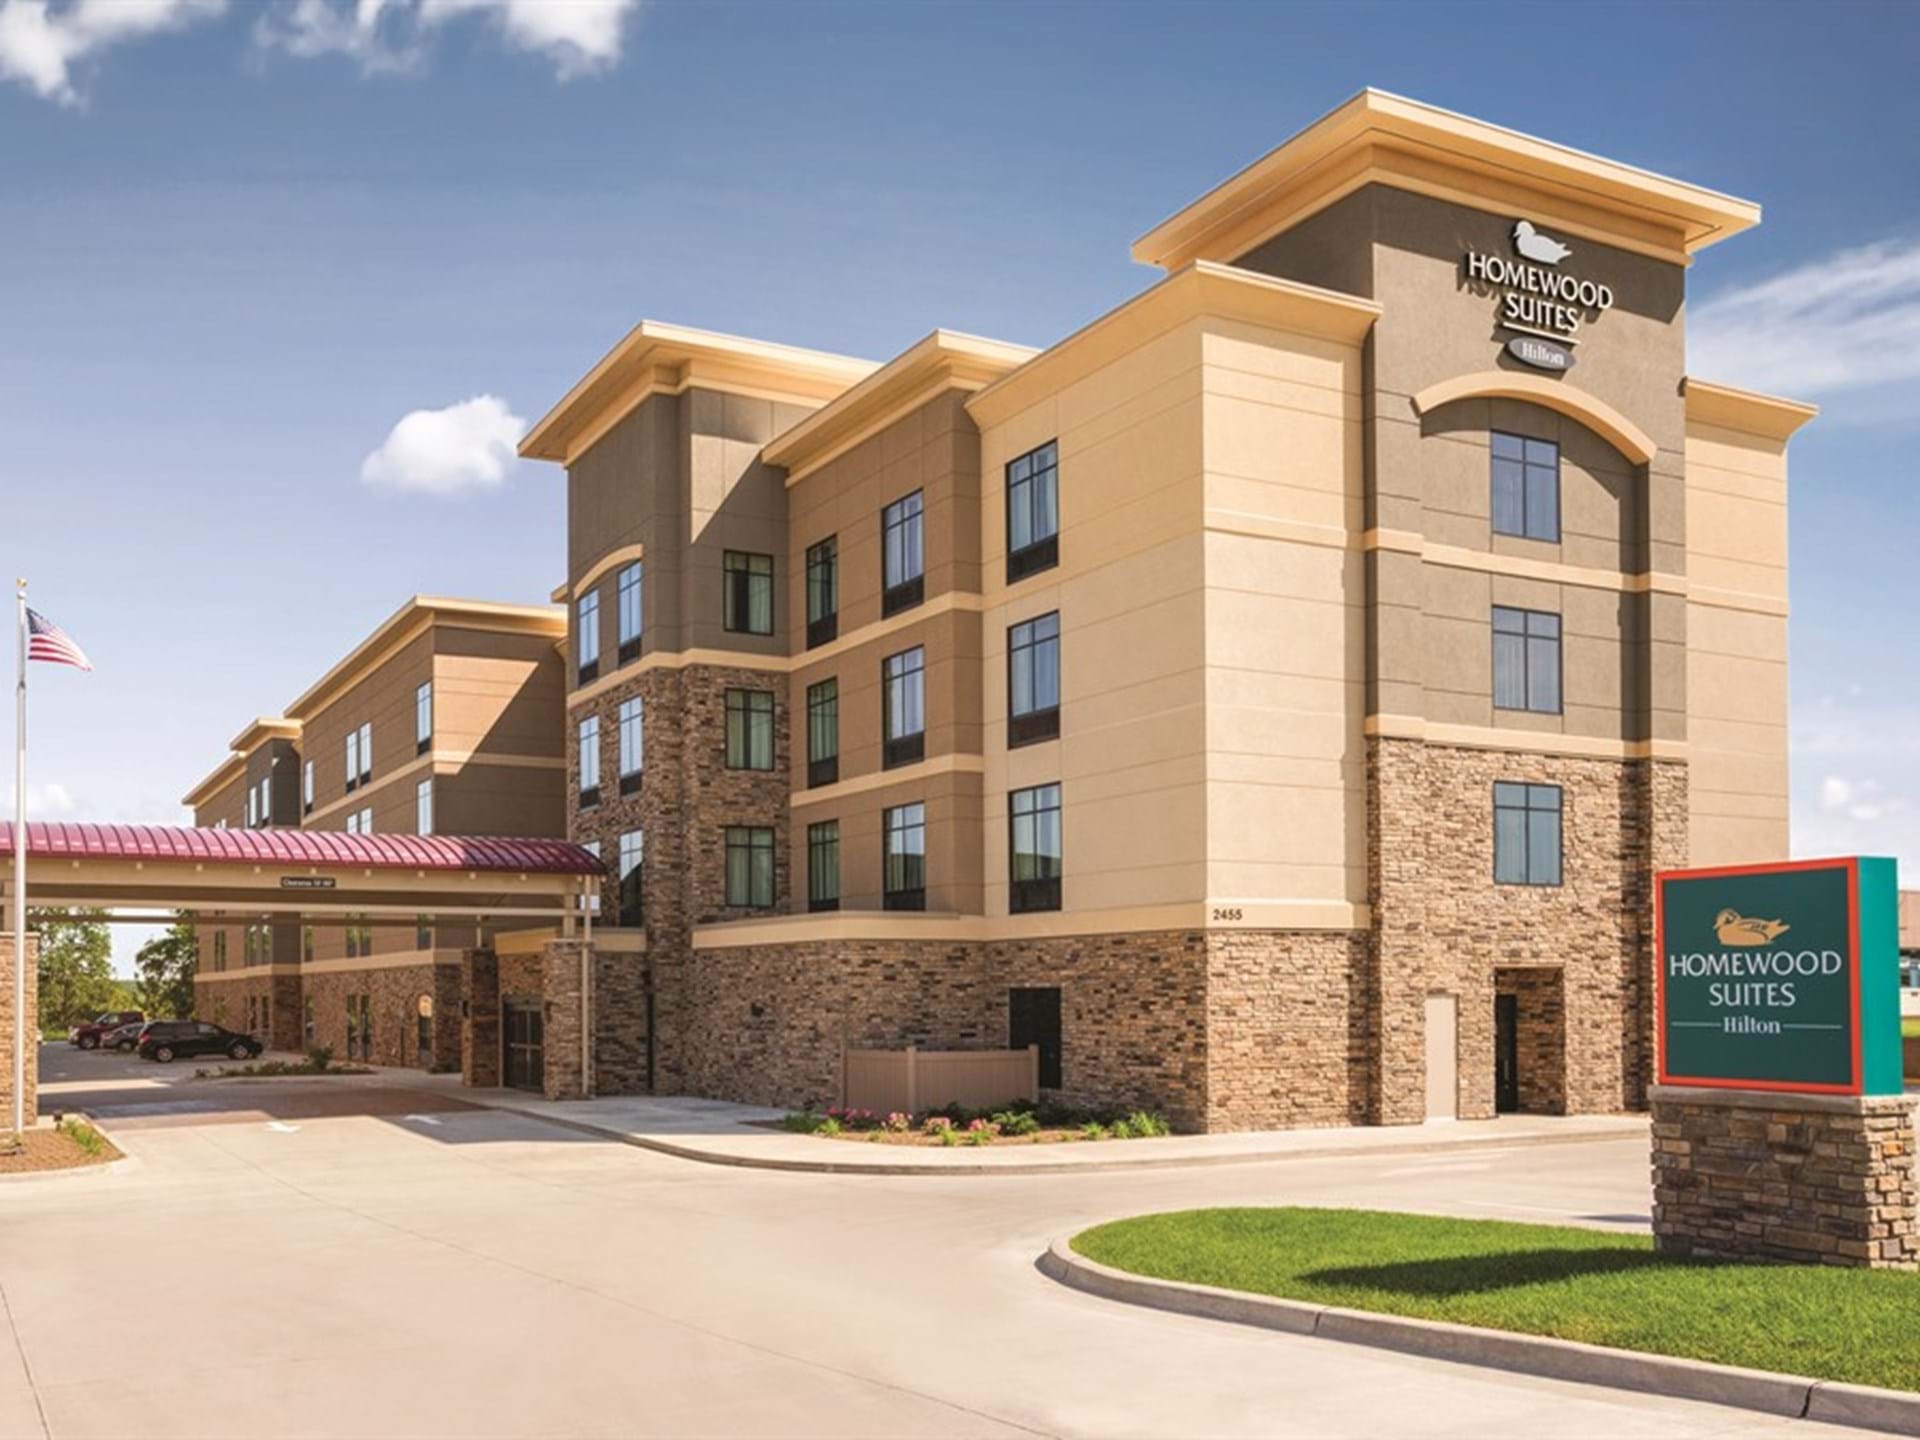 1. New extended stay Homewood Suites in Ankeny Iowa